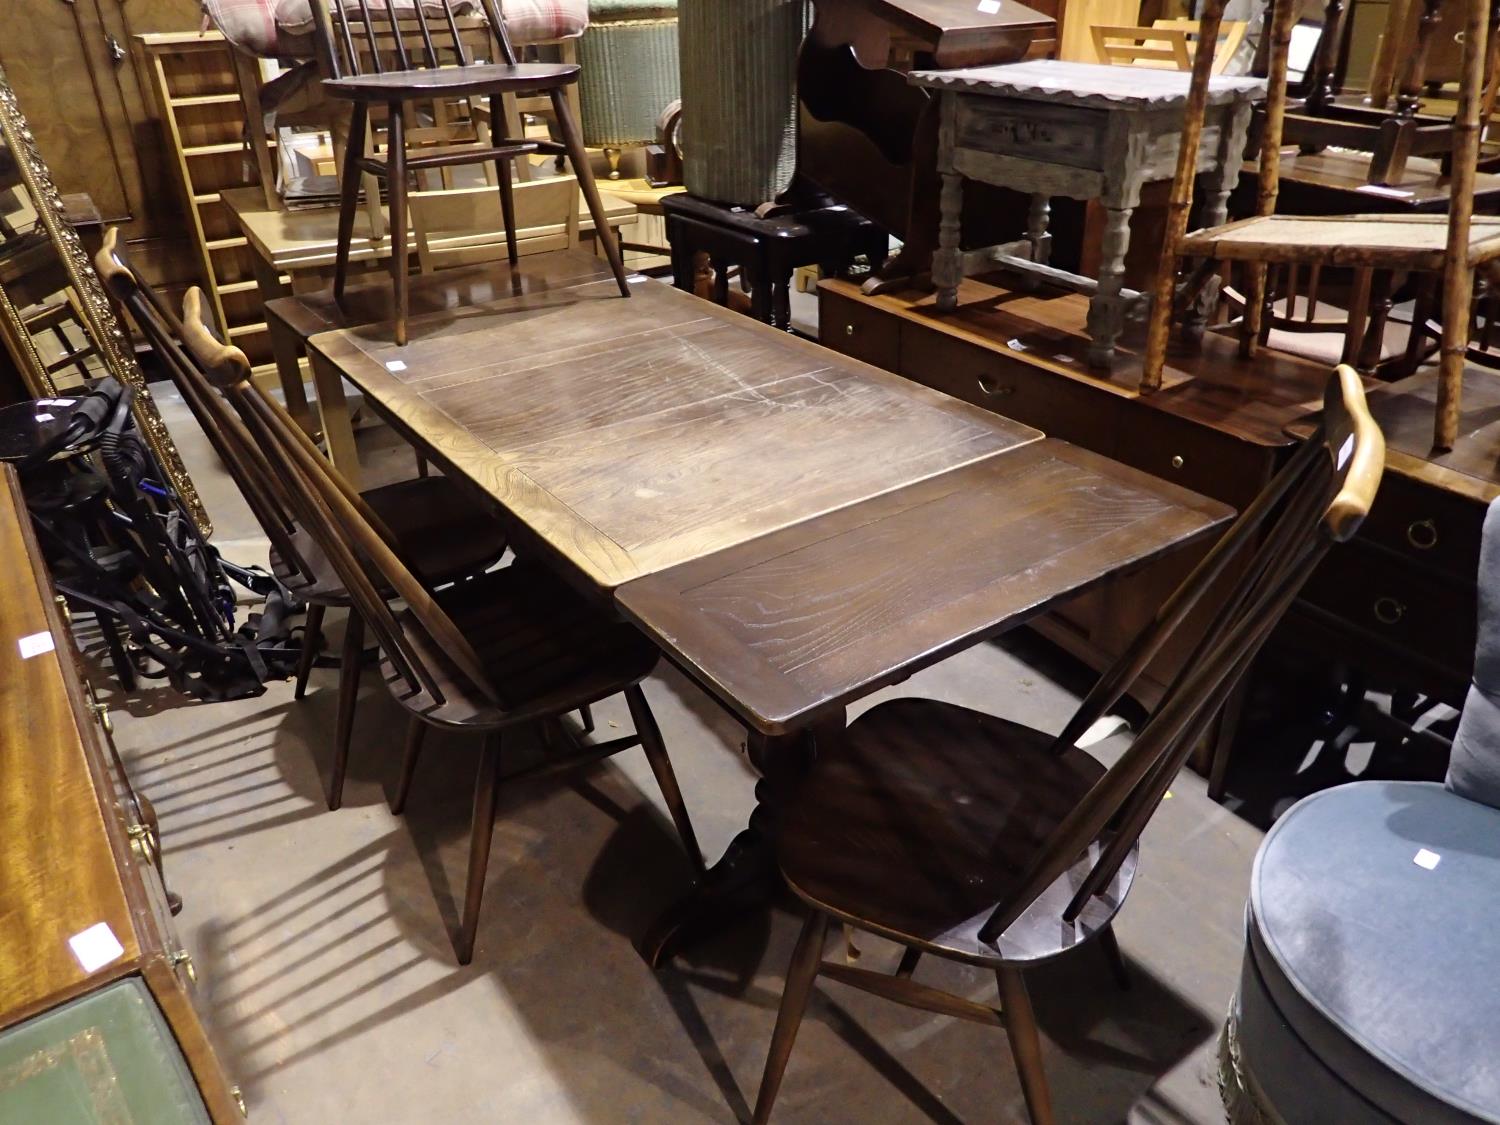 Ercol elm draw leaf dining table with four chairs. Not available for in-house P&P